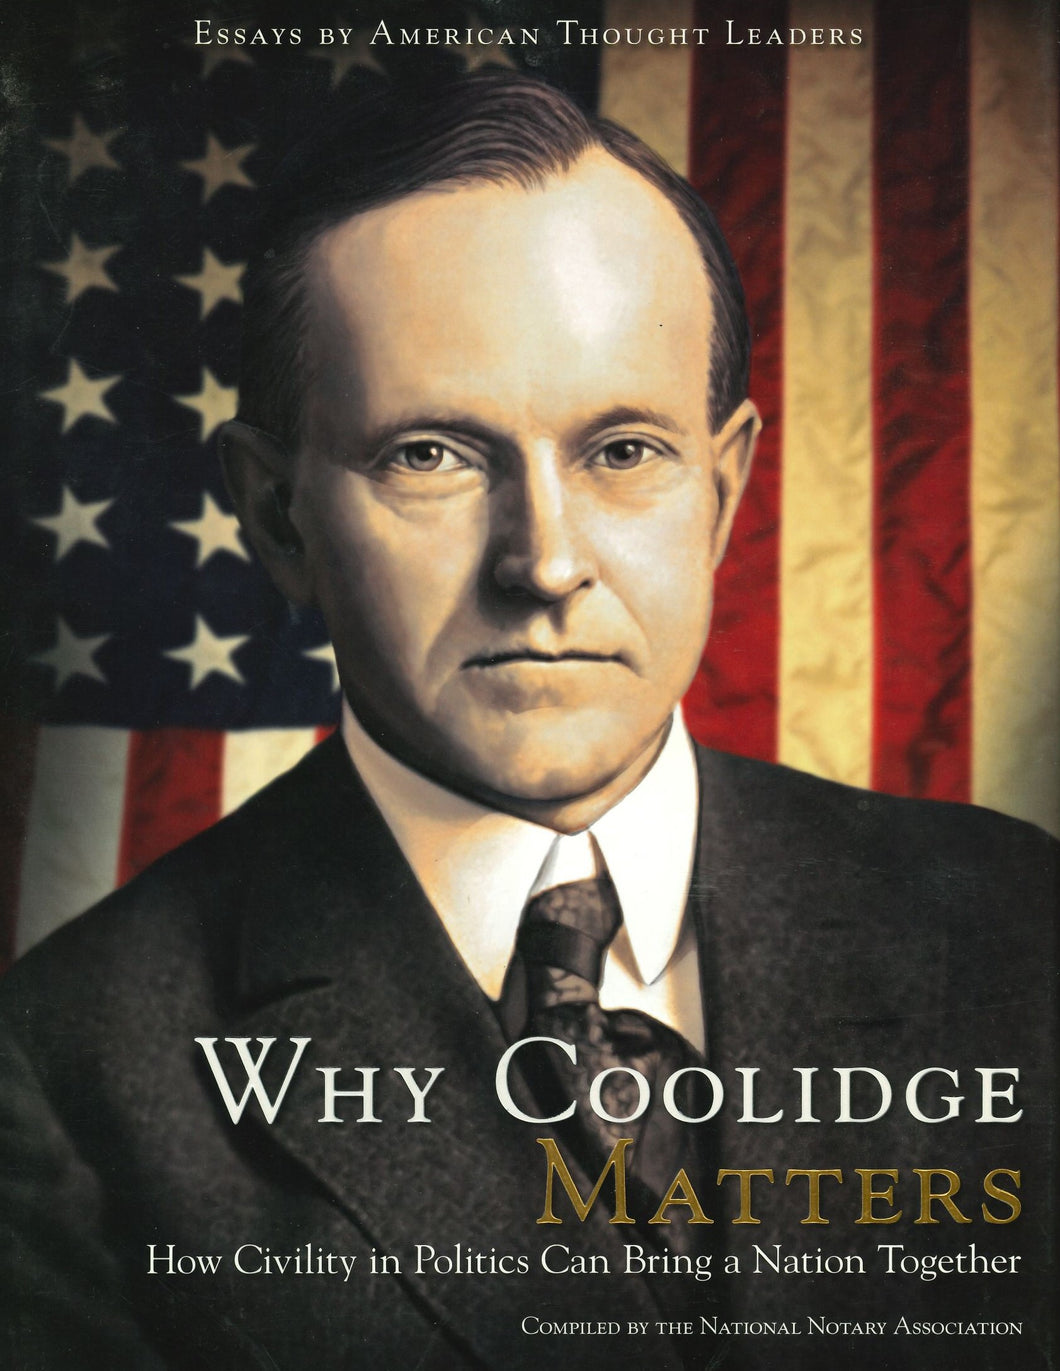 Why Coolidge Matters, compiled by the National Notary Association